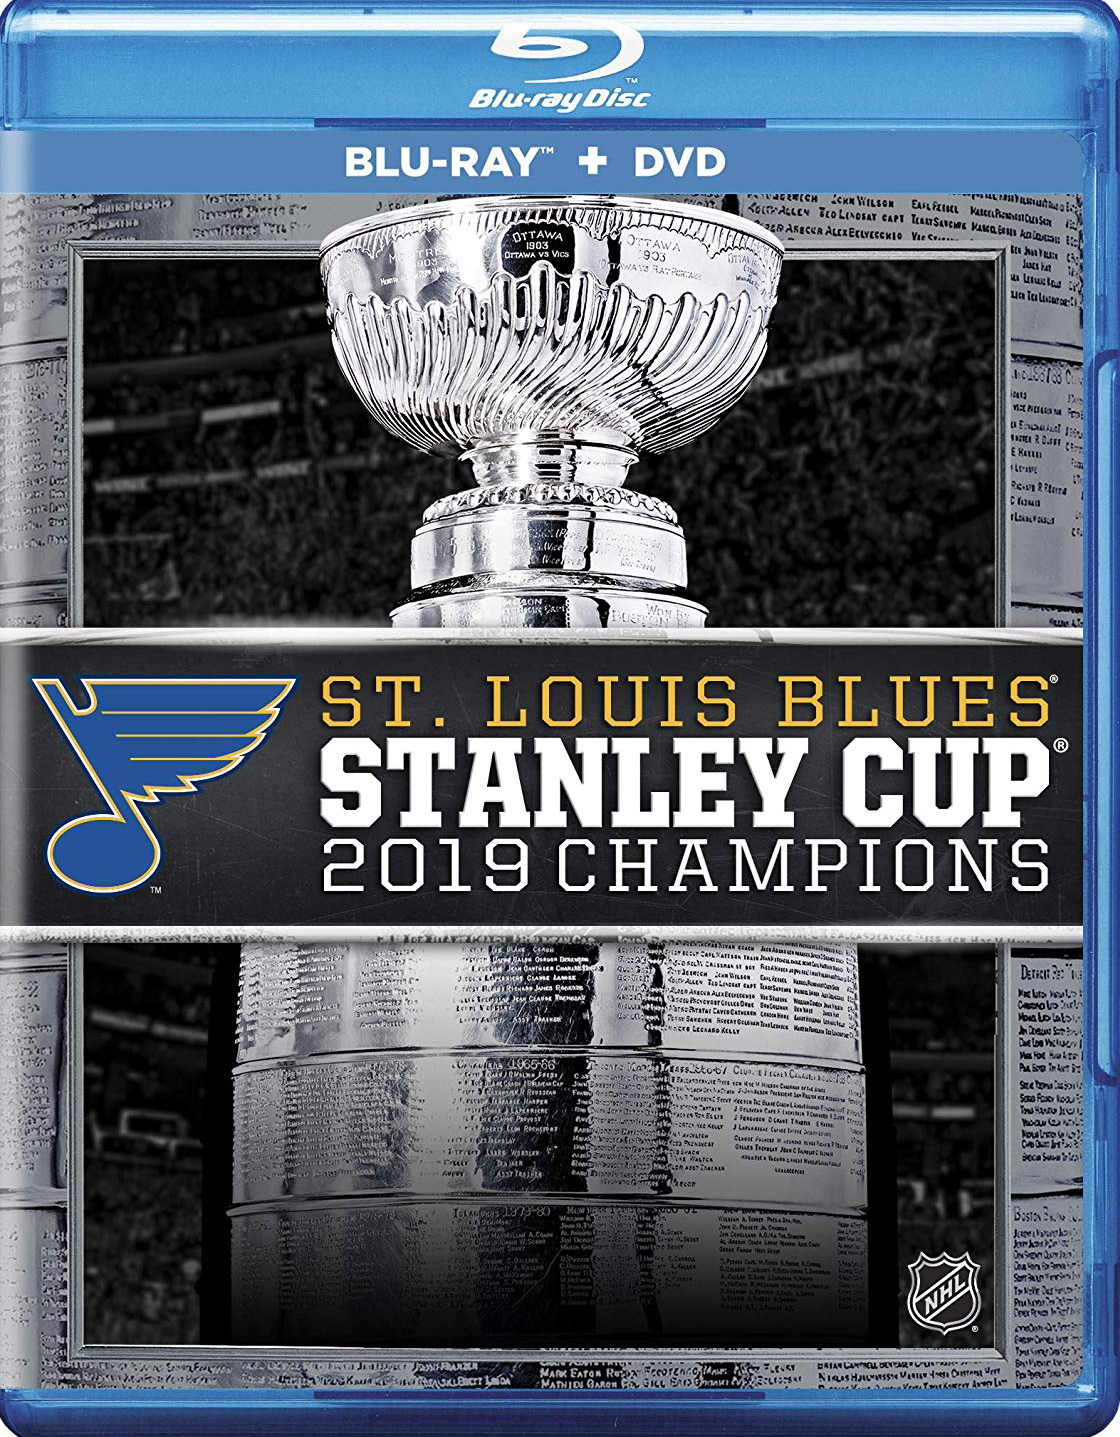 ST. LOUIS BLUES 2019 STANLEY CUP CHAMPIONS PHOTO PLUS 3 CARDS MOUNTED ON  A12 X15 BLACK MARBLE PLAQUE at 's Sports Collectibles Store